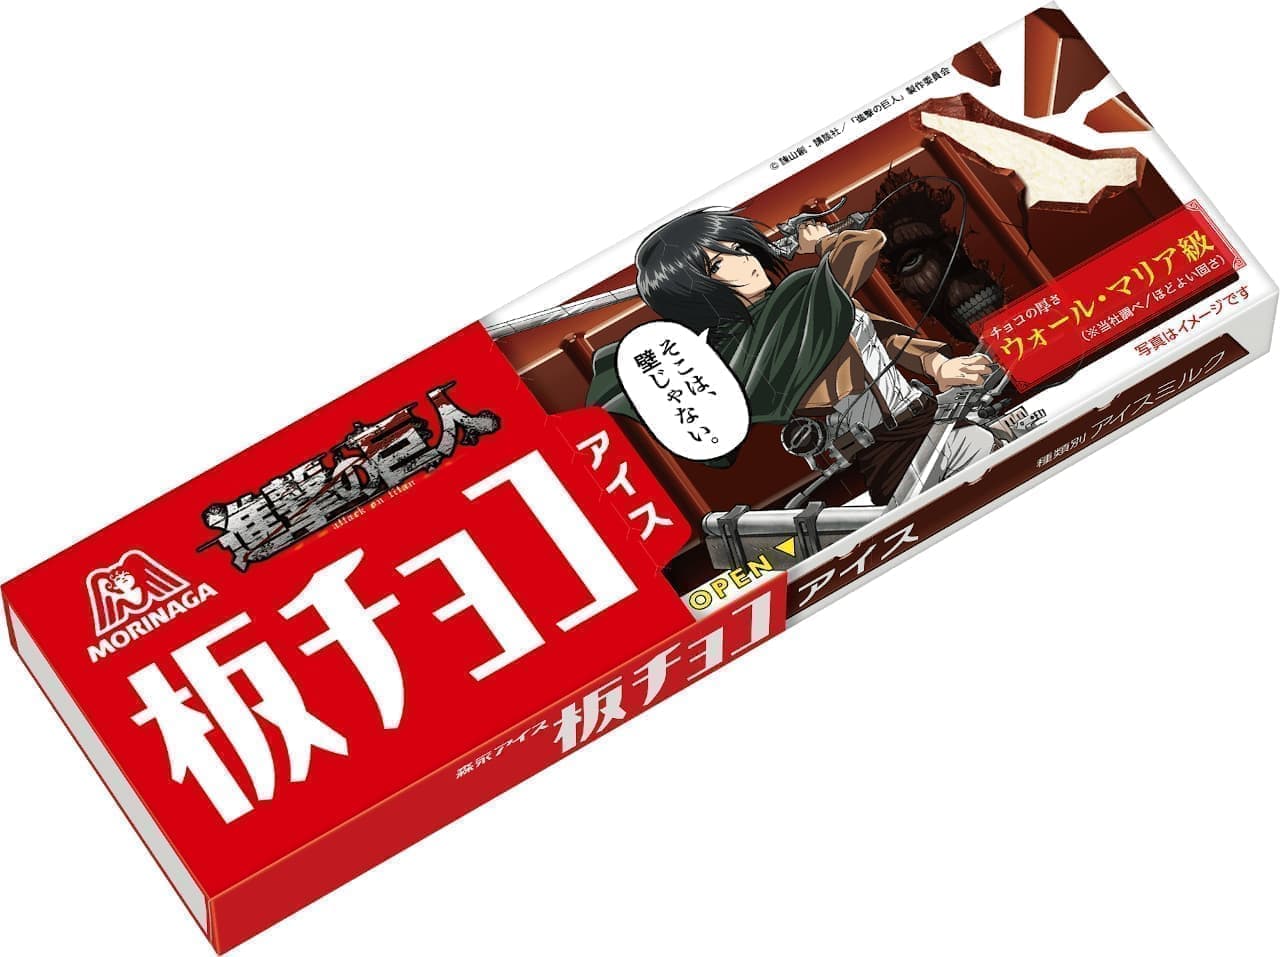 Morinaga & Co., Ltd. "Chocolate Chocolate Ice Attack on Titan Back Cover Package"